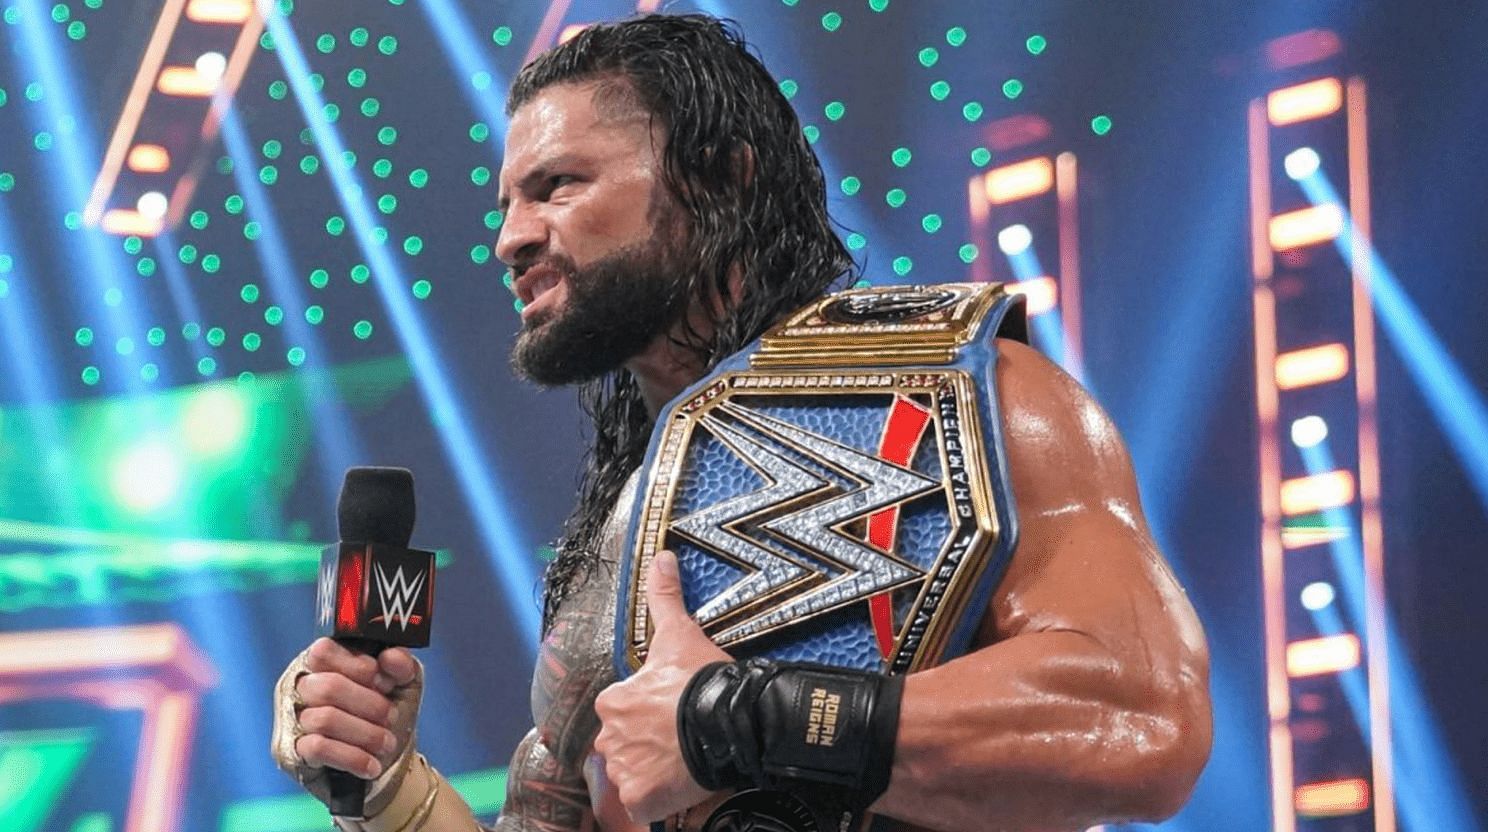 Roman Reigns is currently holding the Universal Championship on SmackDown.